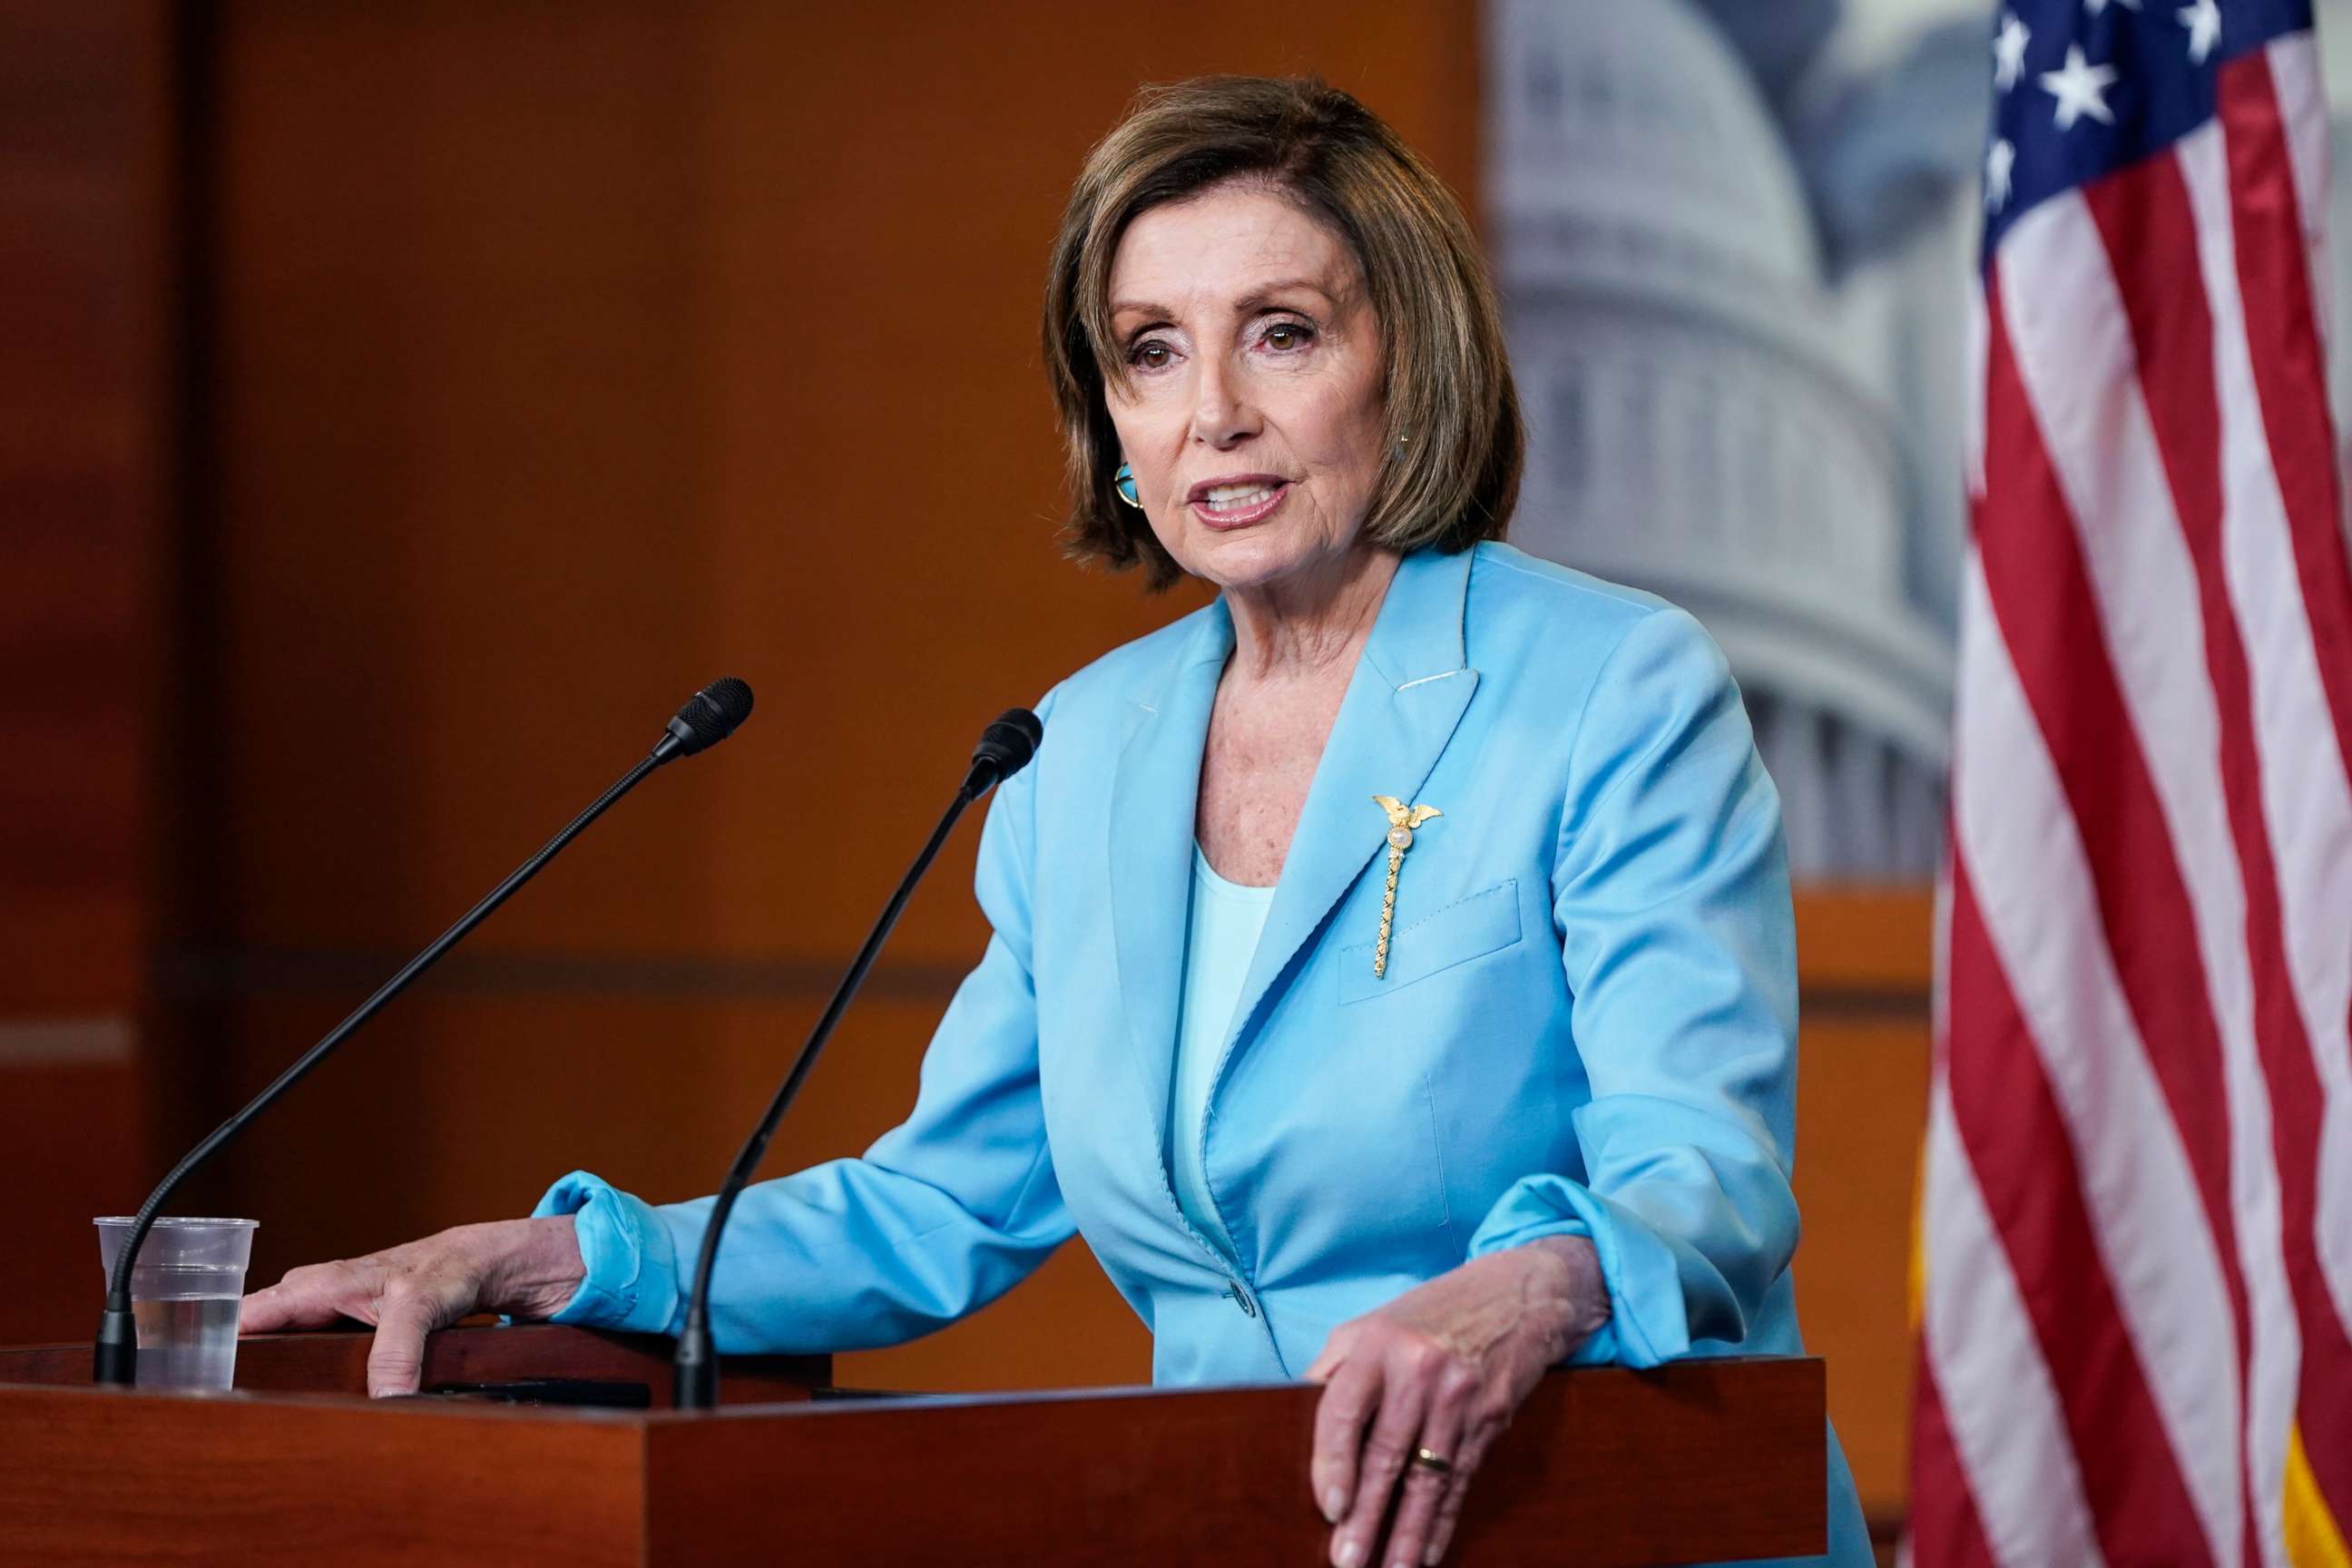 PHOTO: Speaker of the House Nancy Pelosi speaks during her weekly media availability on Capitol Hill on June 17, 2021, in Washington.